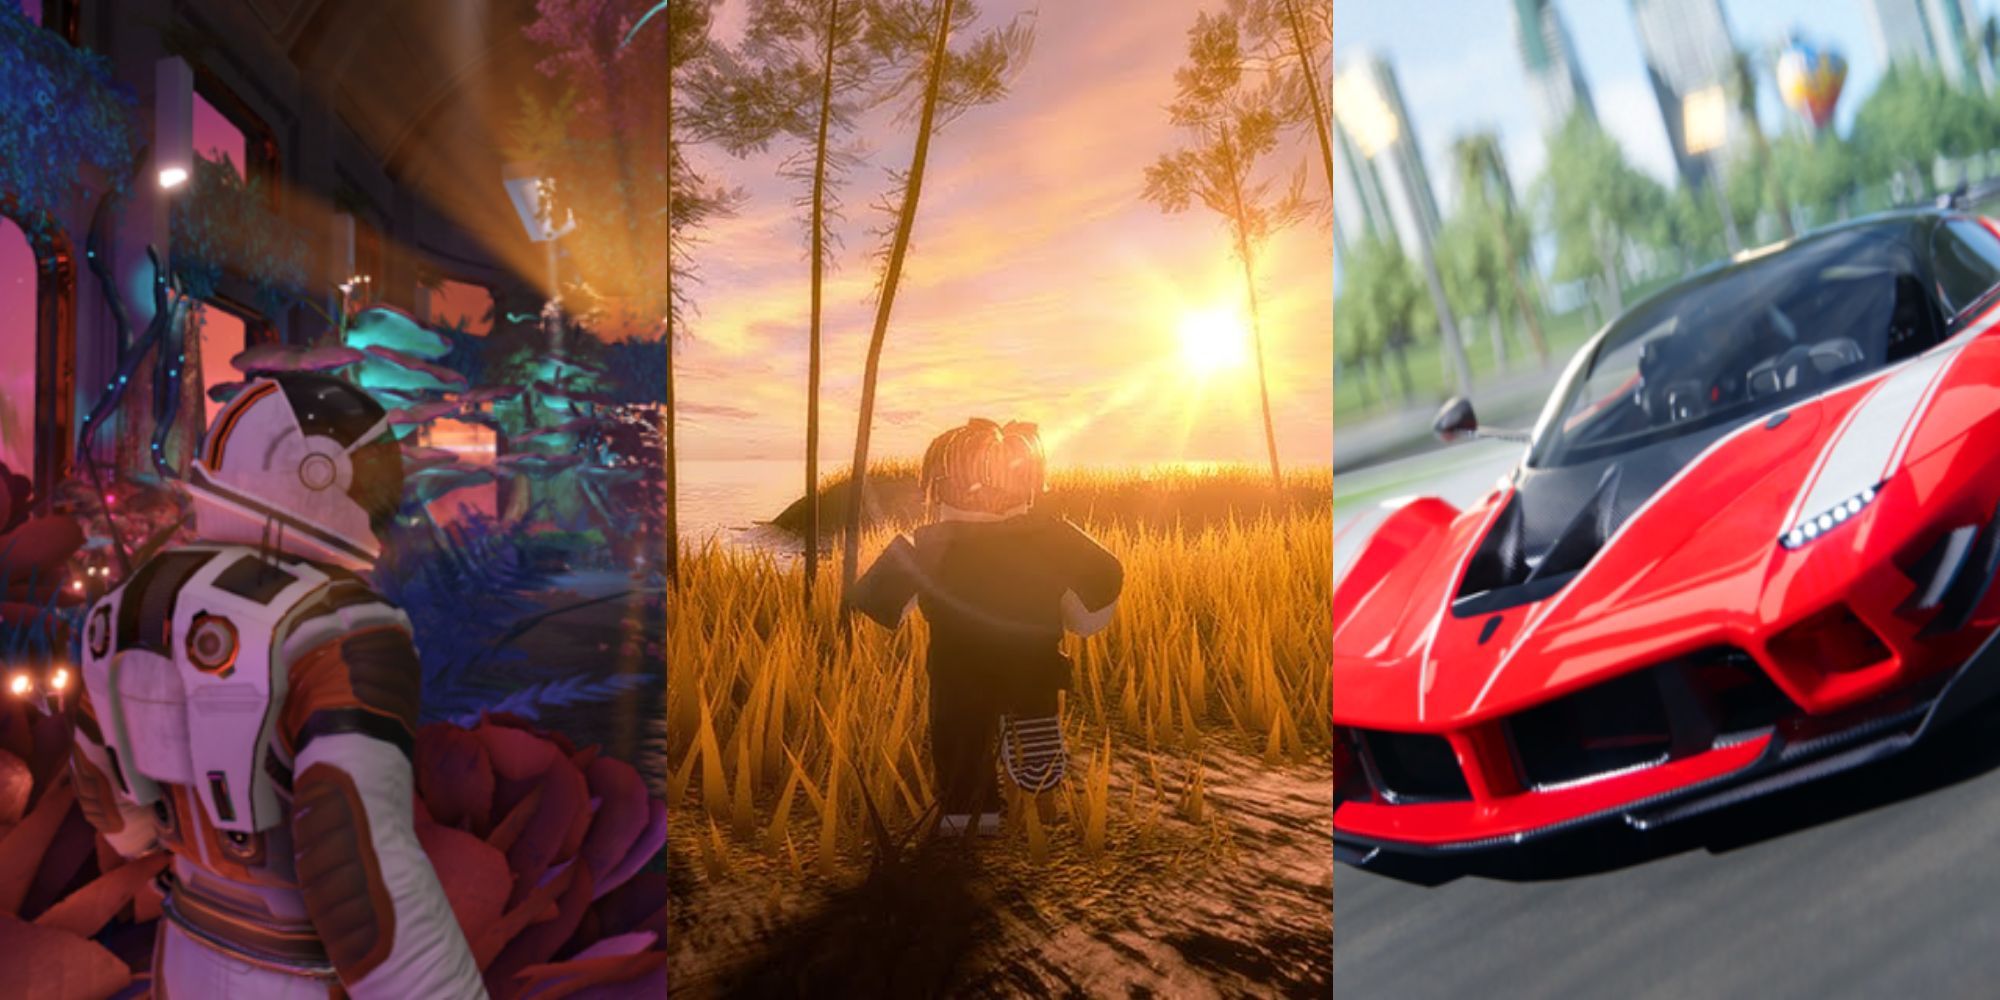 Astronaut in natural space, roblox character in golden field, and a red racing car